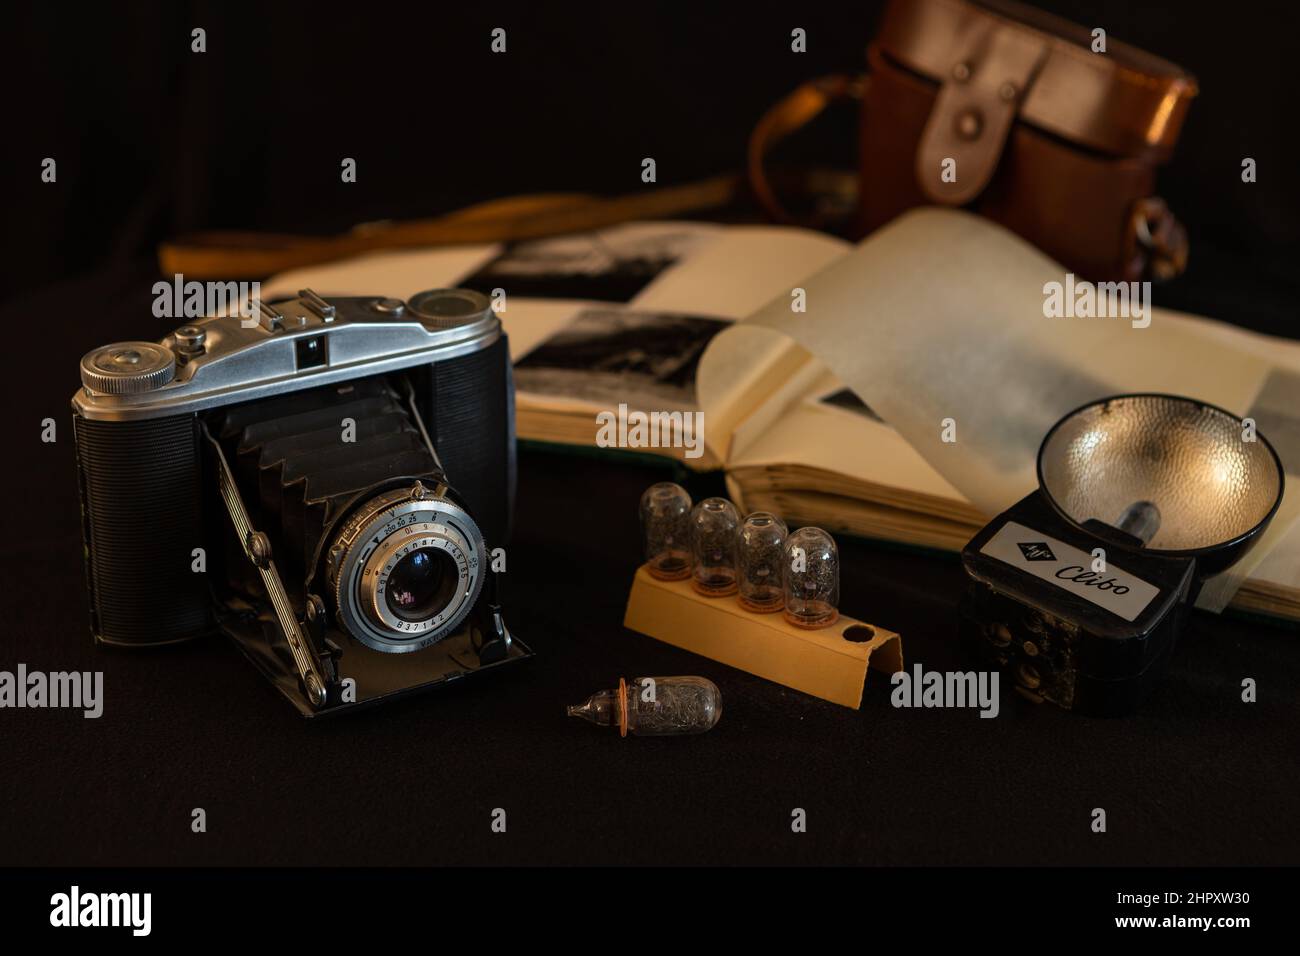 Old photo camera with flash lamps and flash, still life, low key image Stock Photo